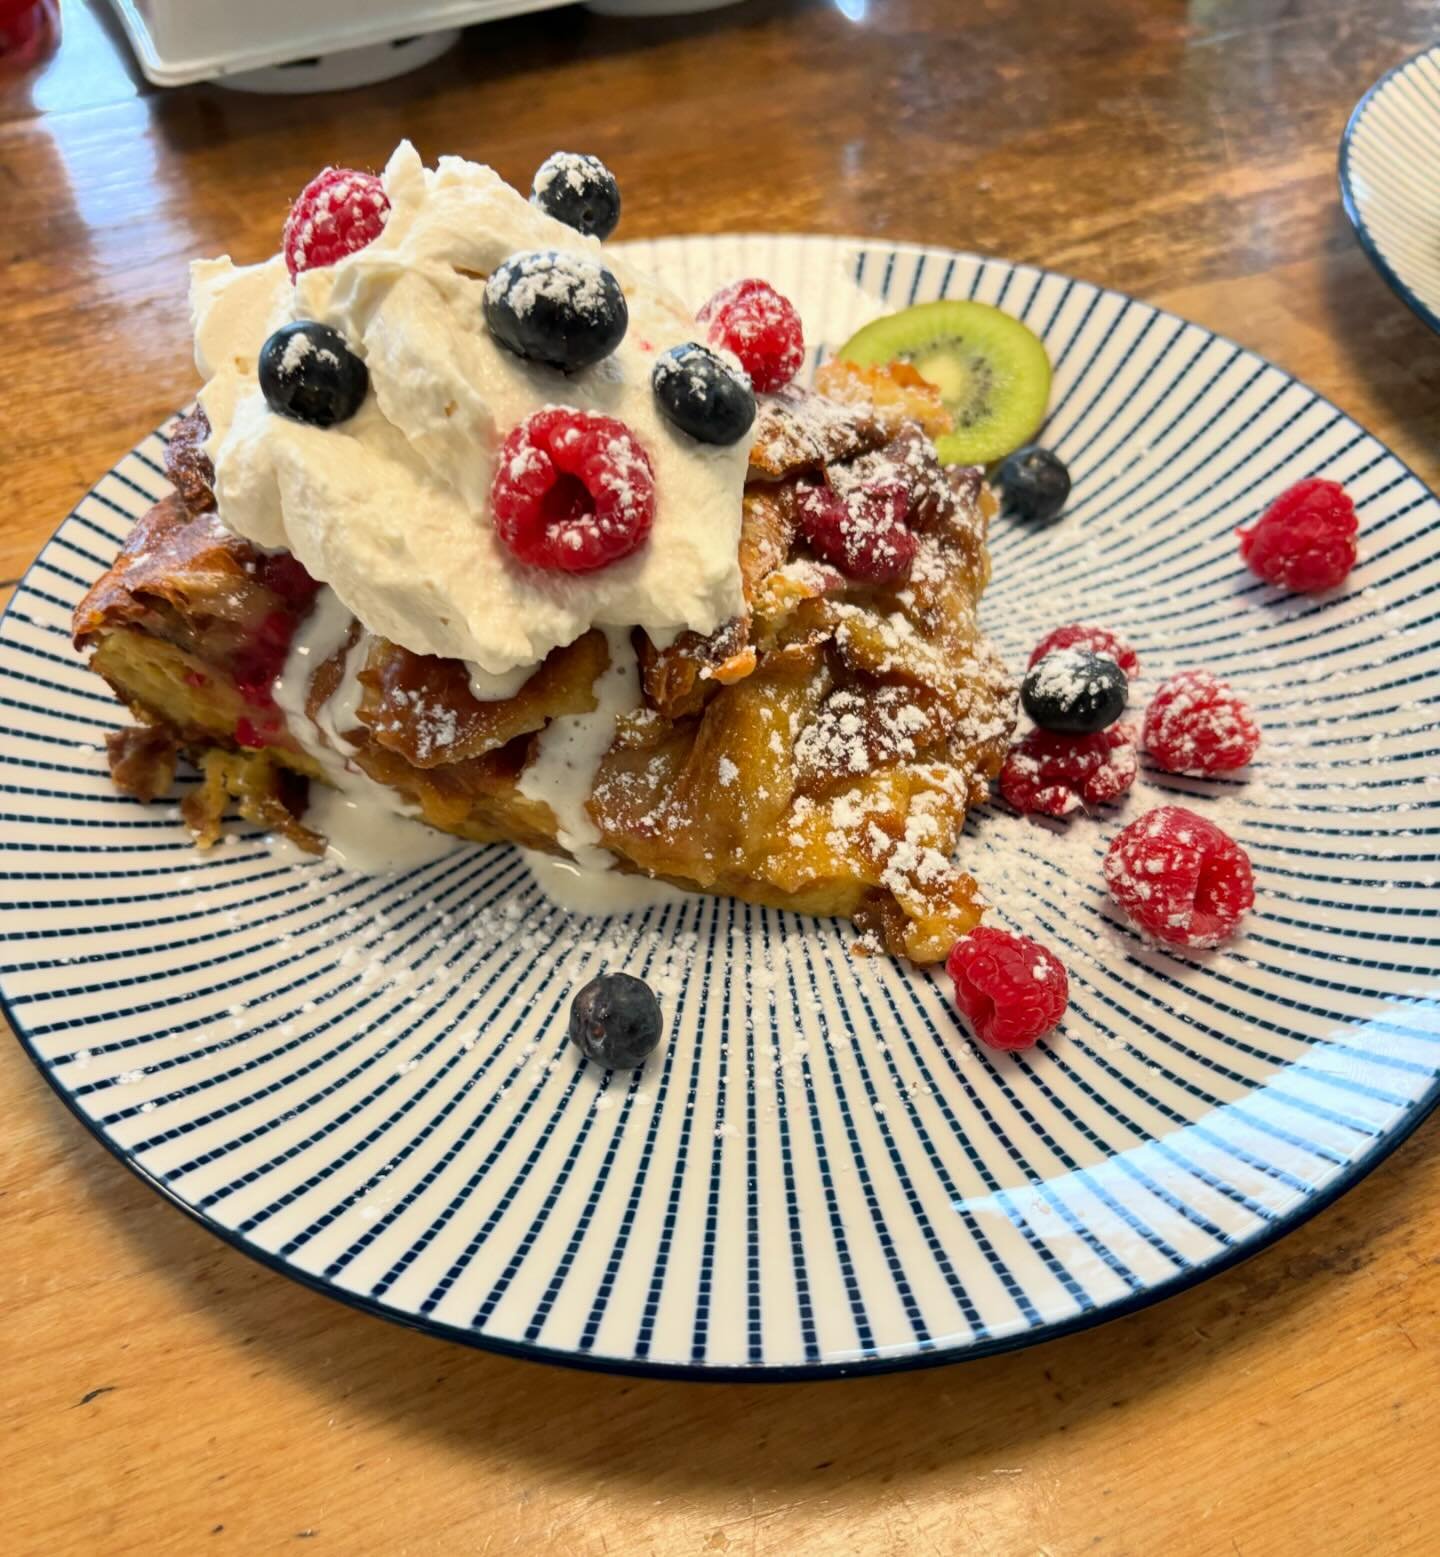 2 of 3 of our delicious Mother&rsquo;s Day specials!!! The first one is a croissant French toast bake with a mixed berry compote and a lemon whipped cream! The 2nd is Lobster mini sliders with chive mayo and warm tarragon butter!!! 
#mothersday #toda